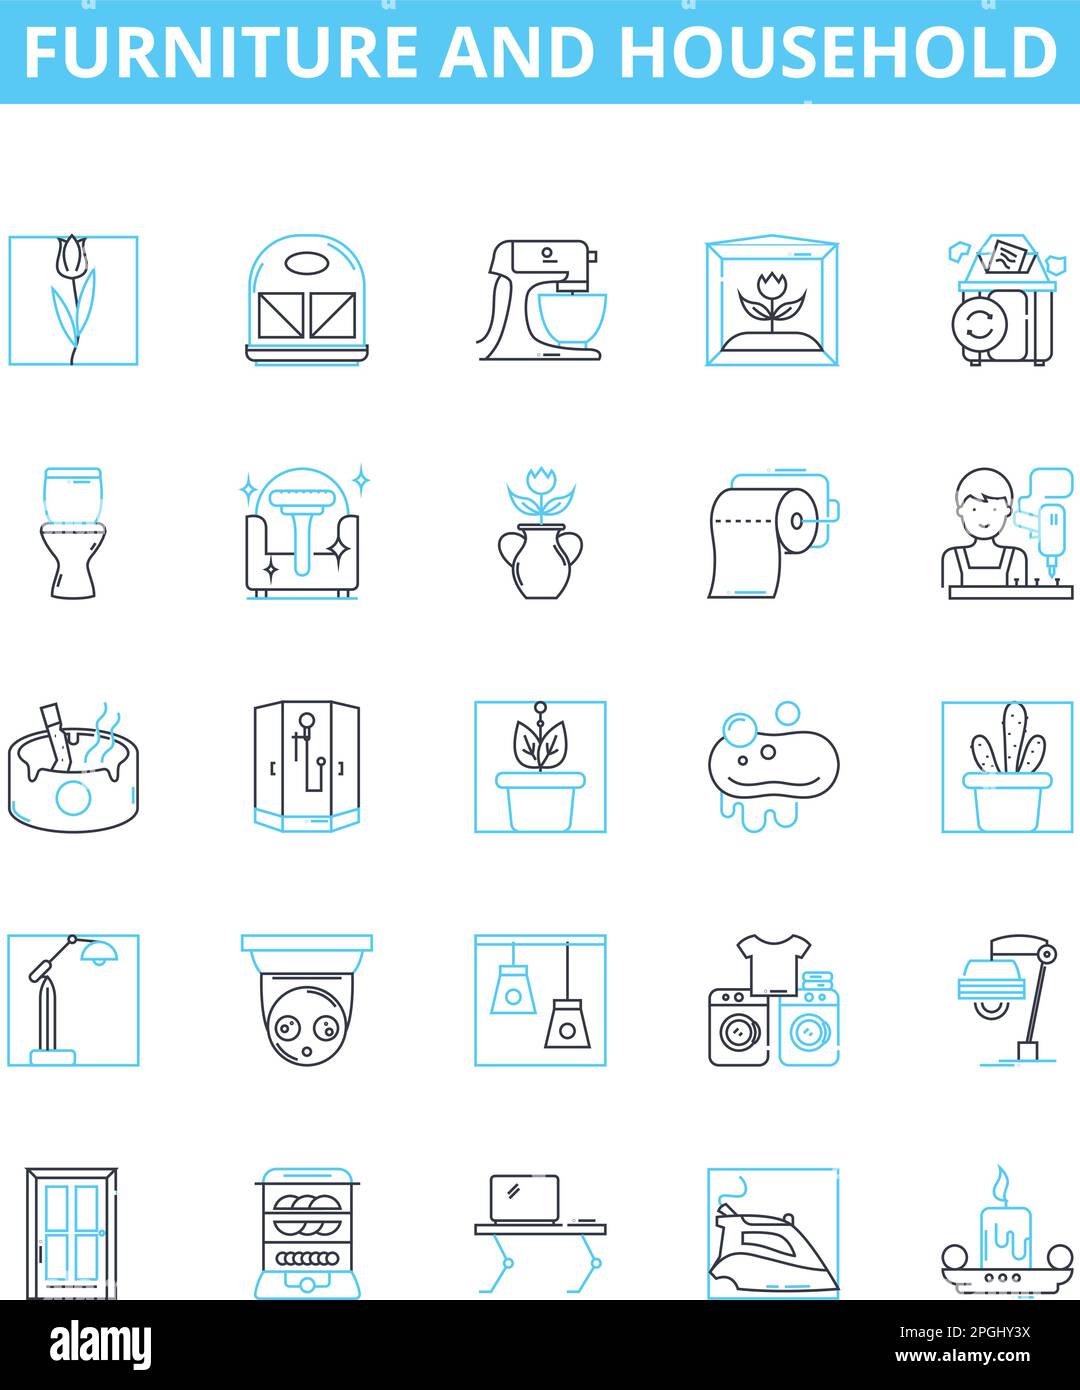 Furniture and household vector line icons set. Furniture, Household, Chair, Couch, Table, Desk, Bed illustration outline concept symbols and signs Stock Vector